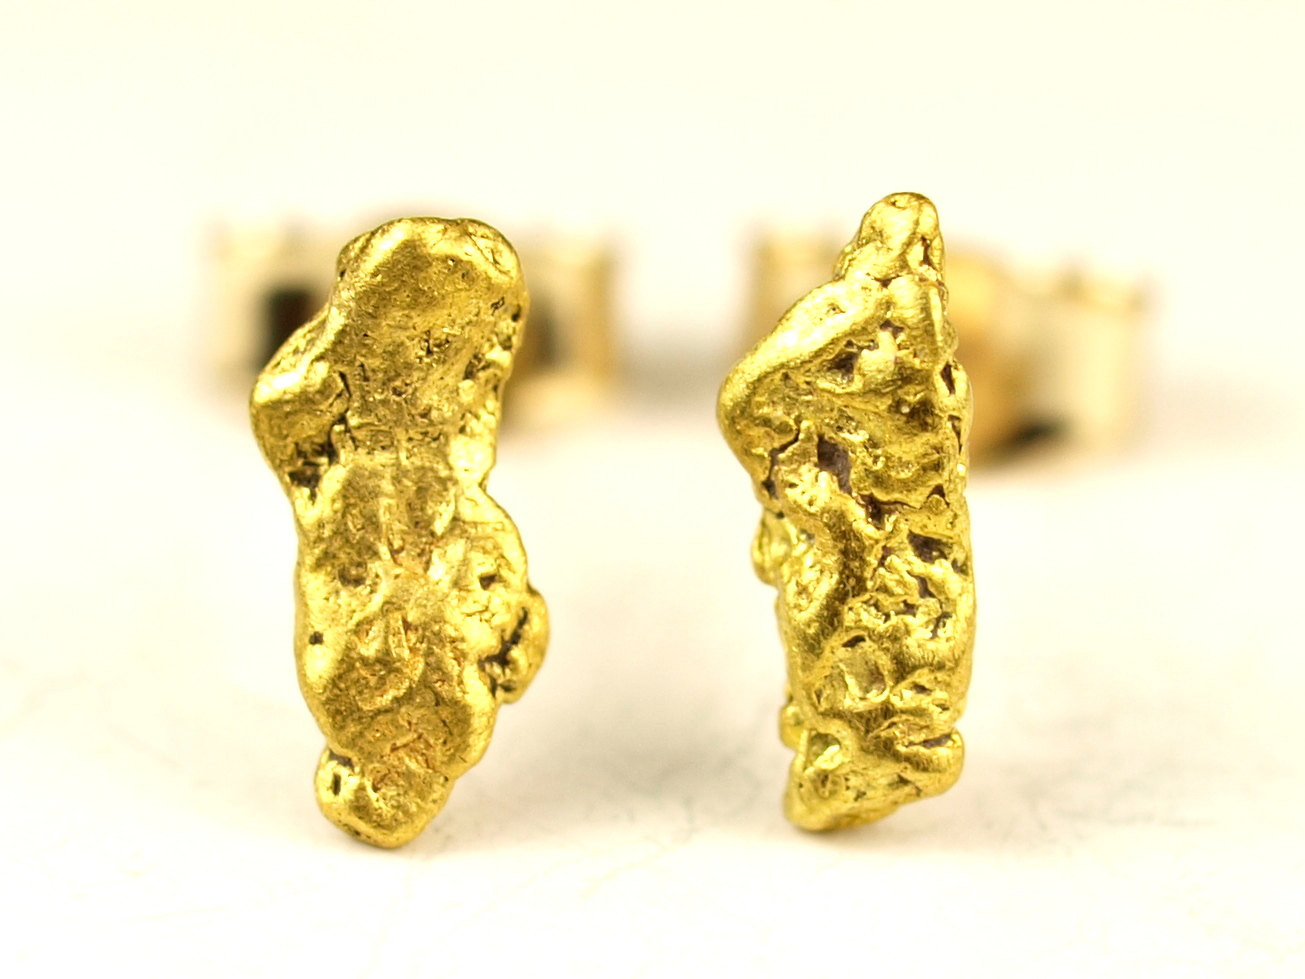 Gold Nugget Earrings
 Natural Gold Nug Stud Earrings with 14k posts and backs